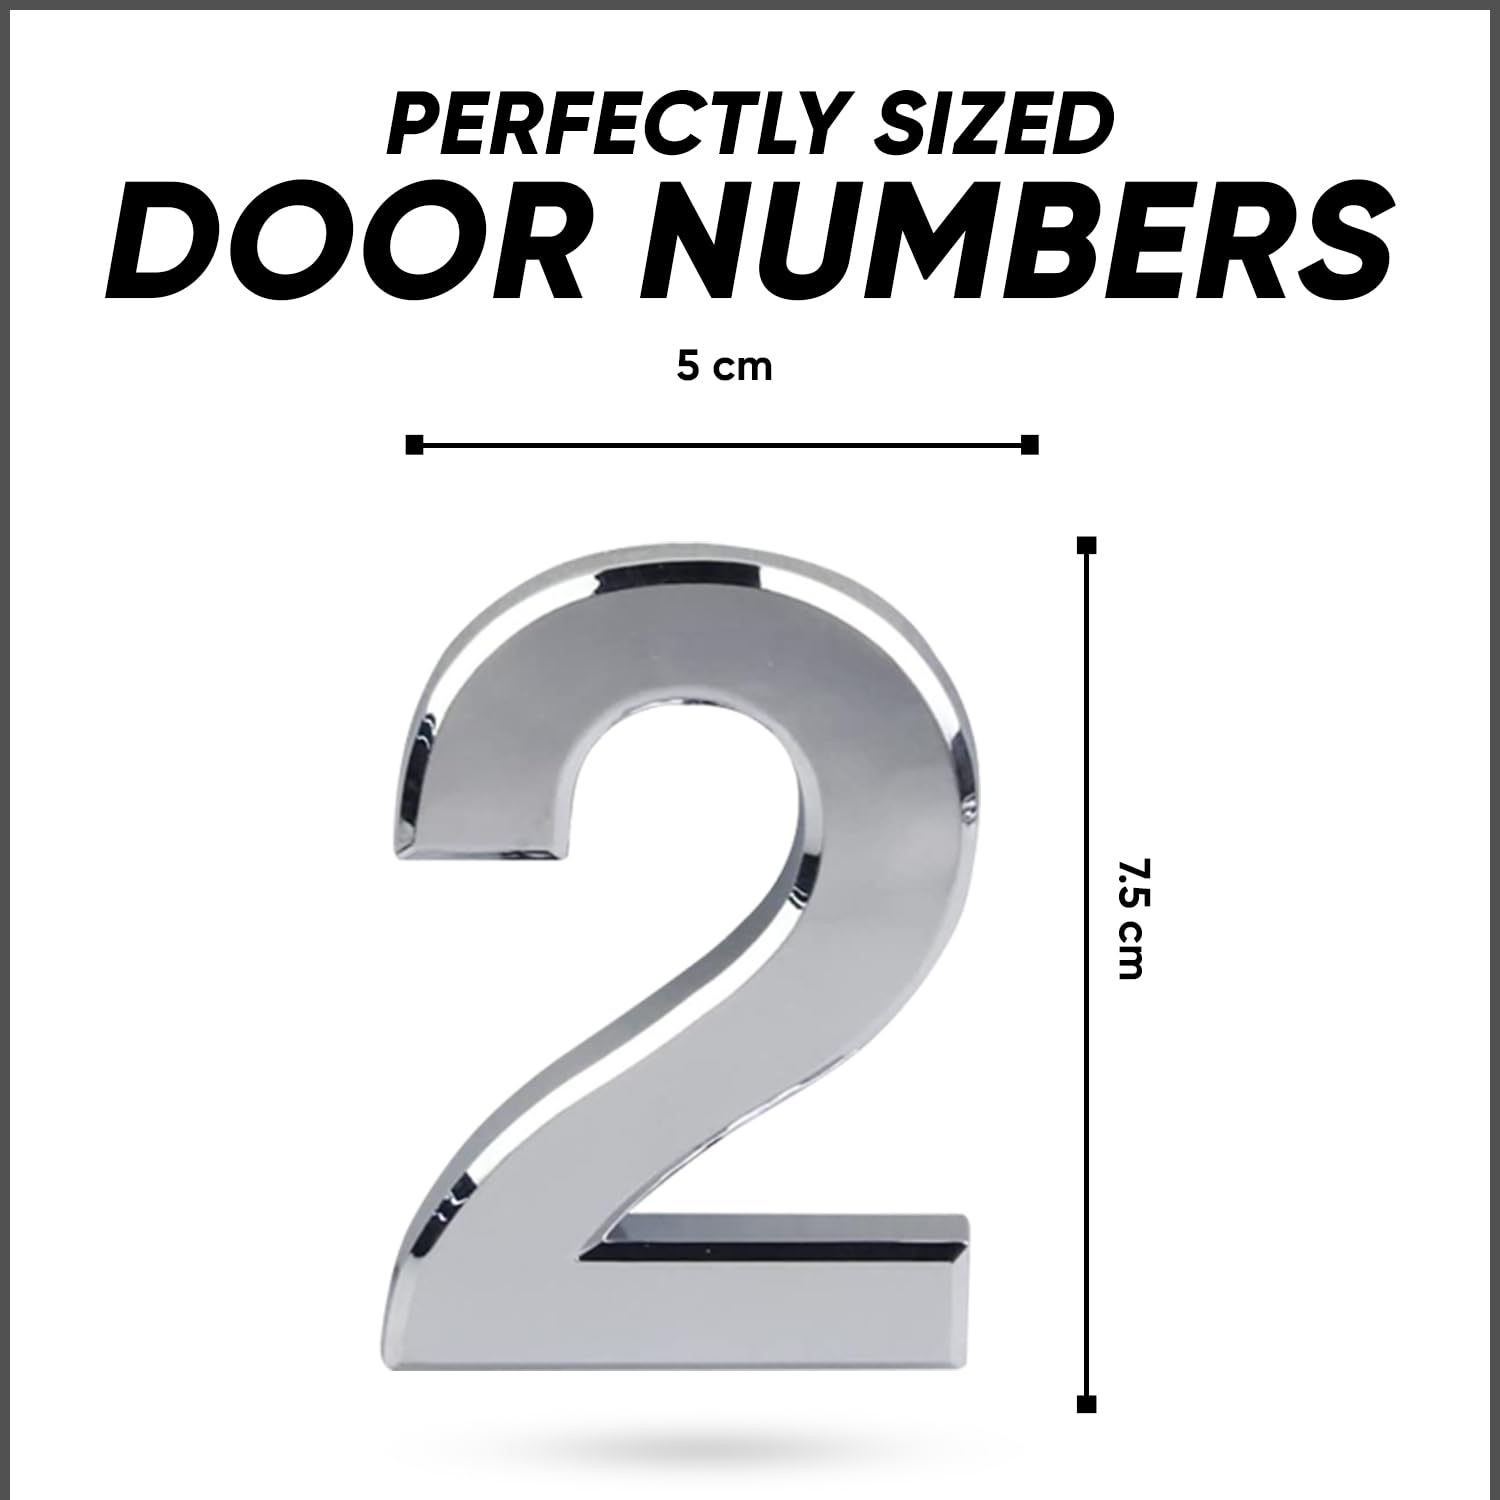 3'' Chrome Effect Door Numbers 0-99 Stick On Door Number House Numbers ABS Self Adhesive Silver 3D House Numbers For Doors, Mail Boxes, Hotel Rooms Door Number Stickers (2)